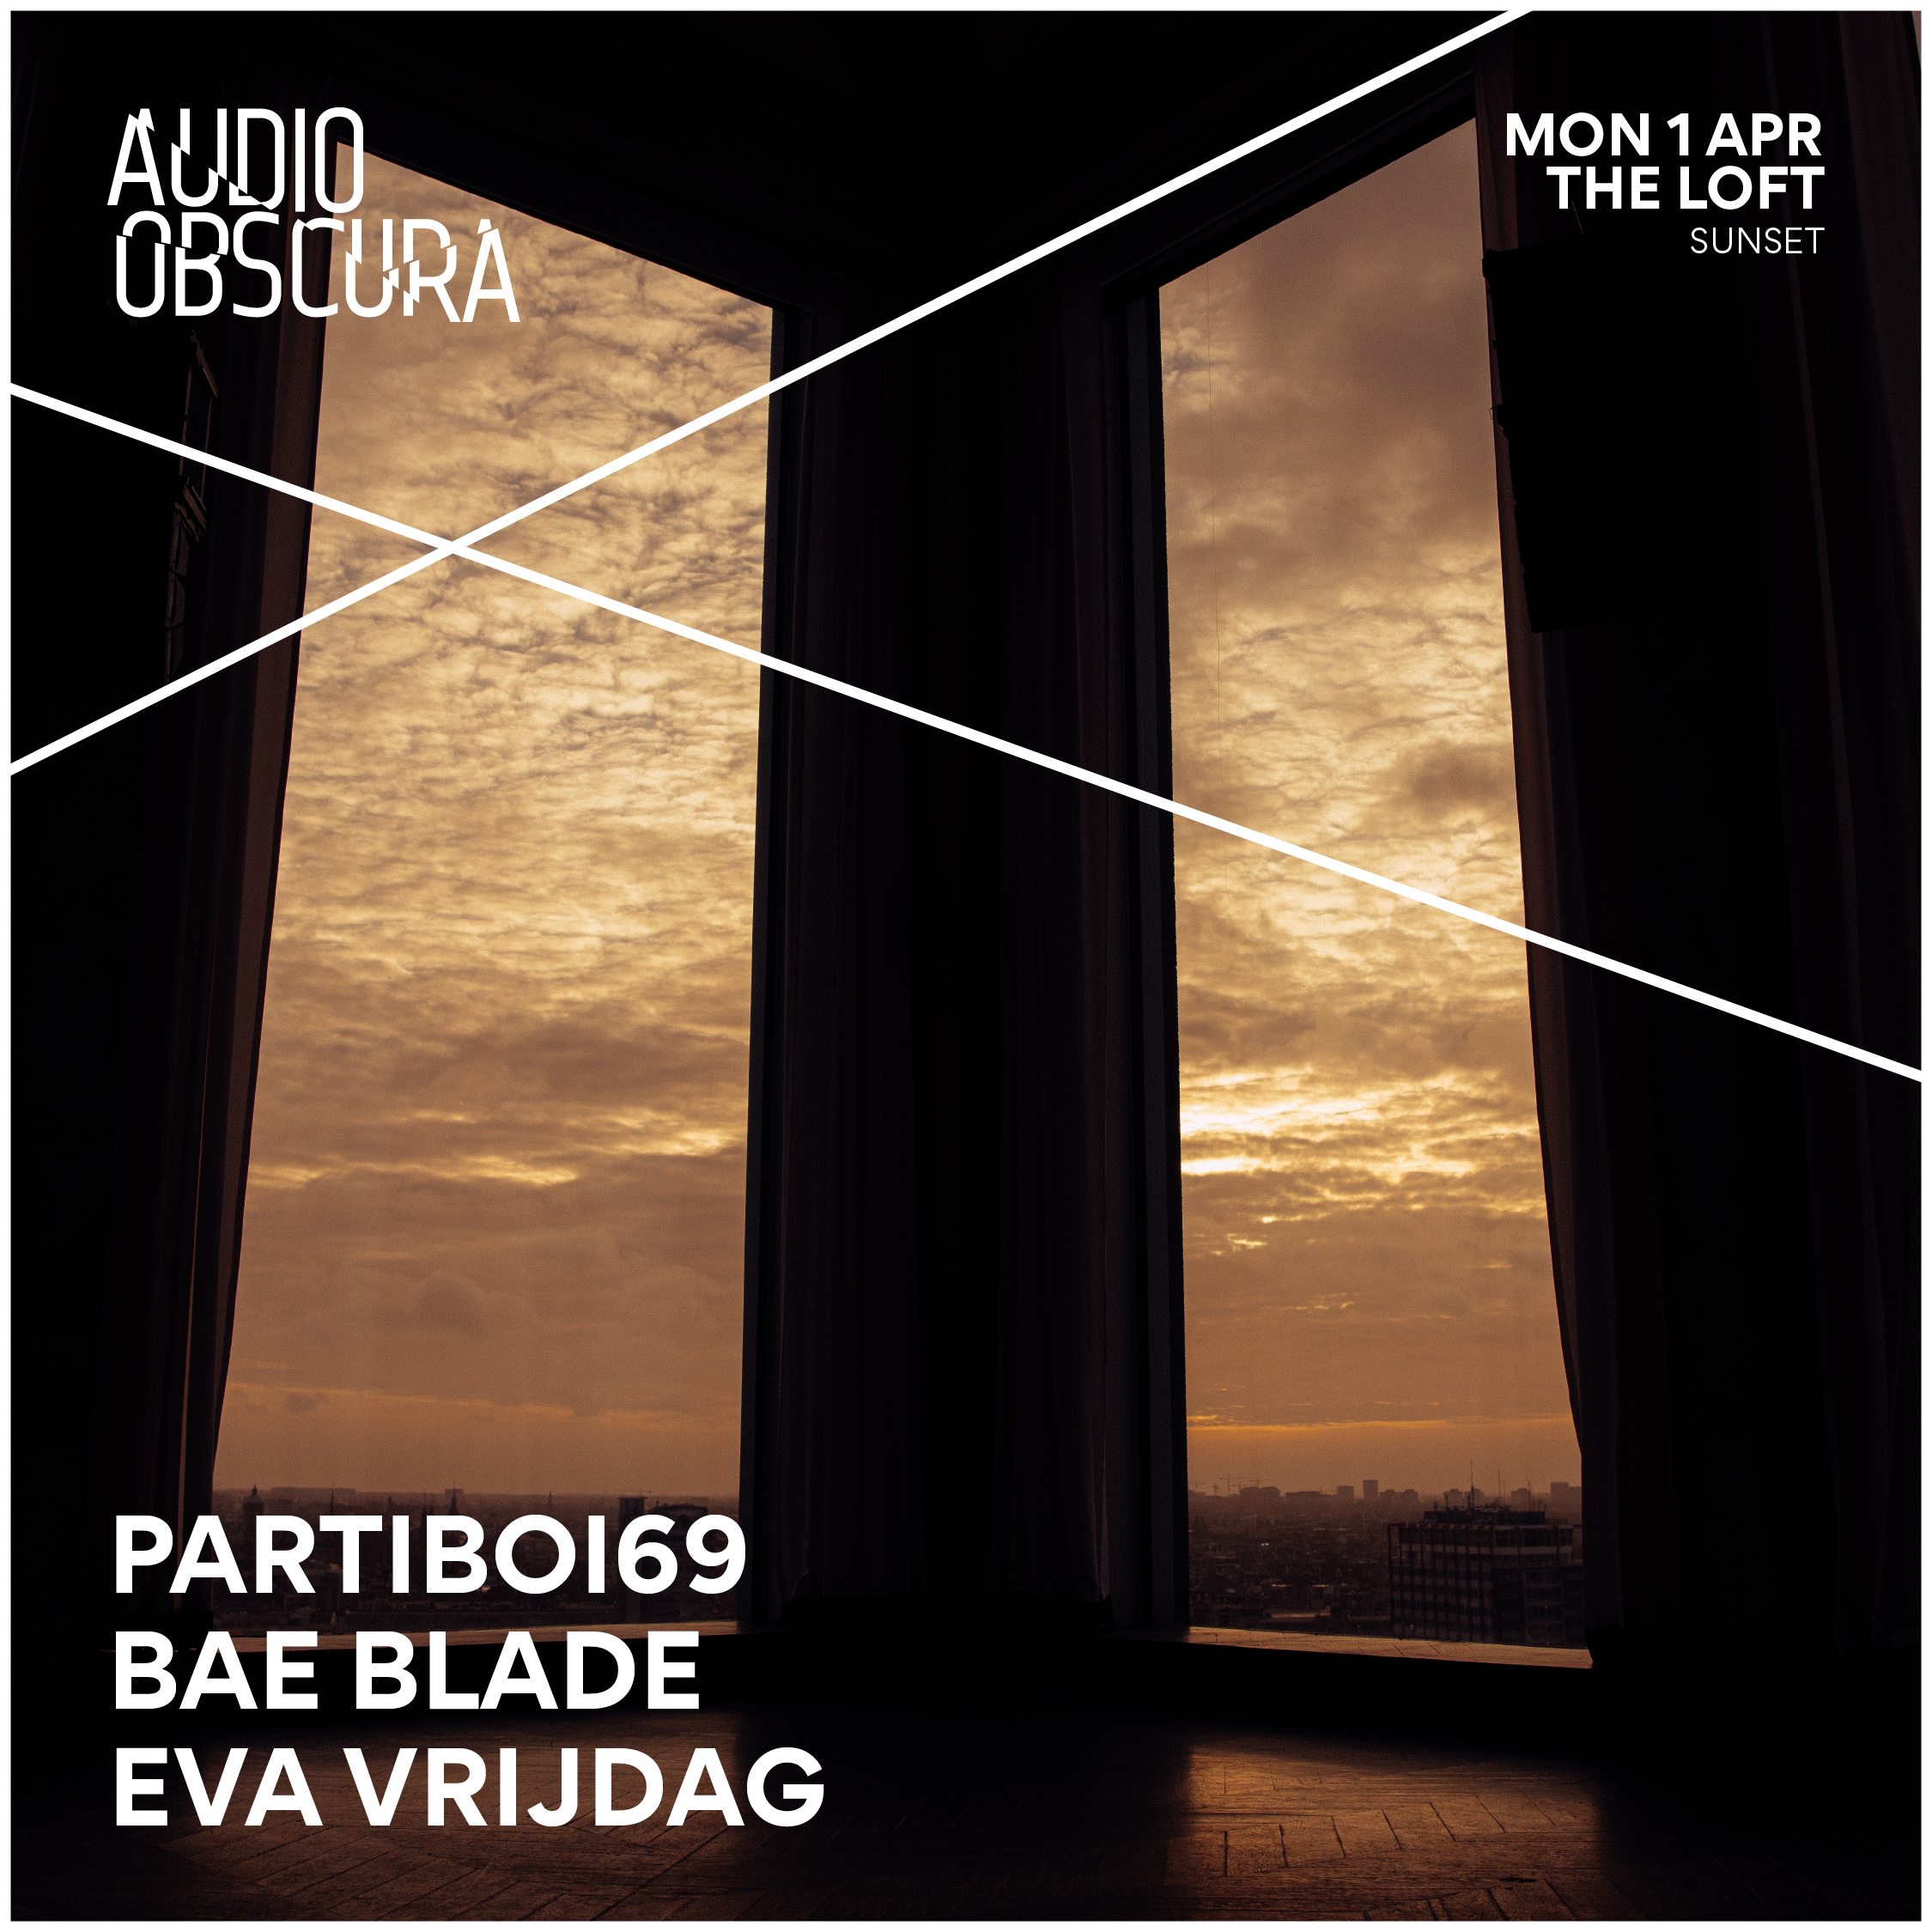 Audio Obscura at The Loft Easter Special with Partiboi69 - フライヤー表